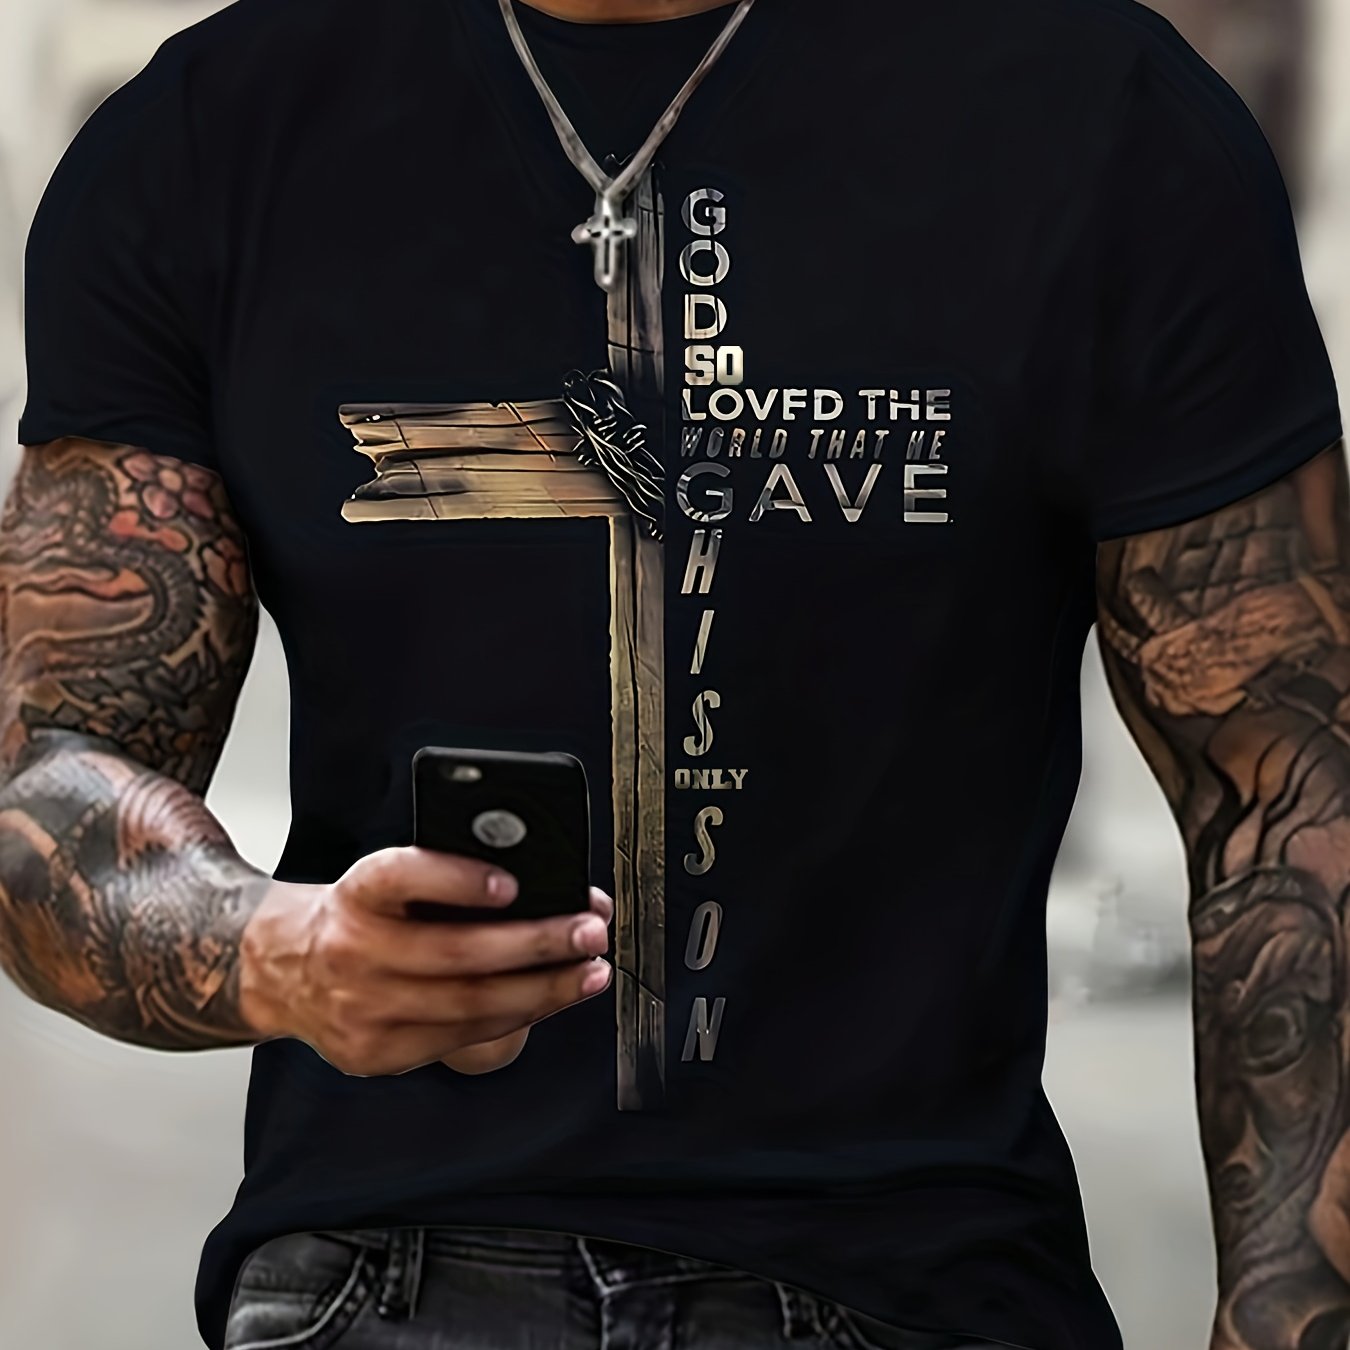 GOD & Cross Print, Men's Graphic Design Crew Neck Novel T-shirt, Casual Comfy Tees Tshirts For Summer, Men's Clothing Tops For Daily Vacation Resorts